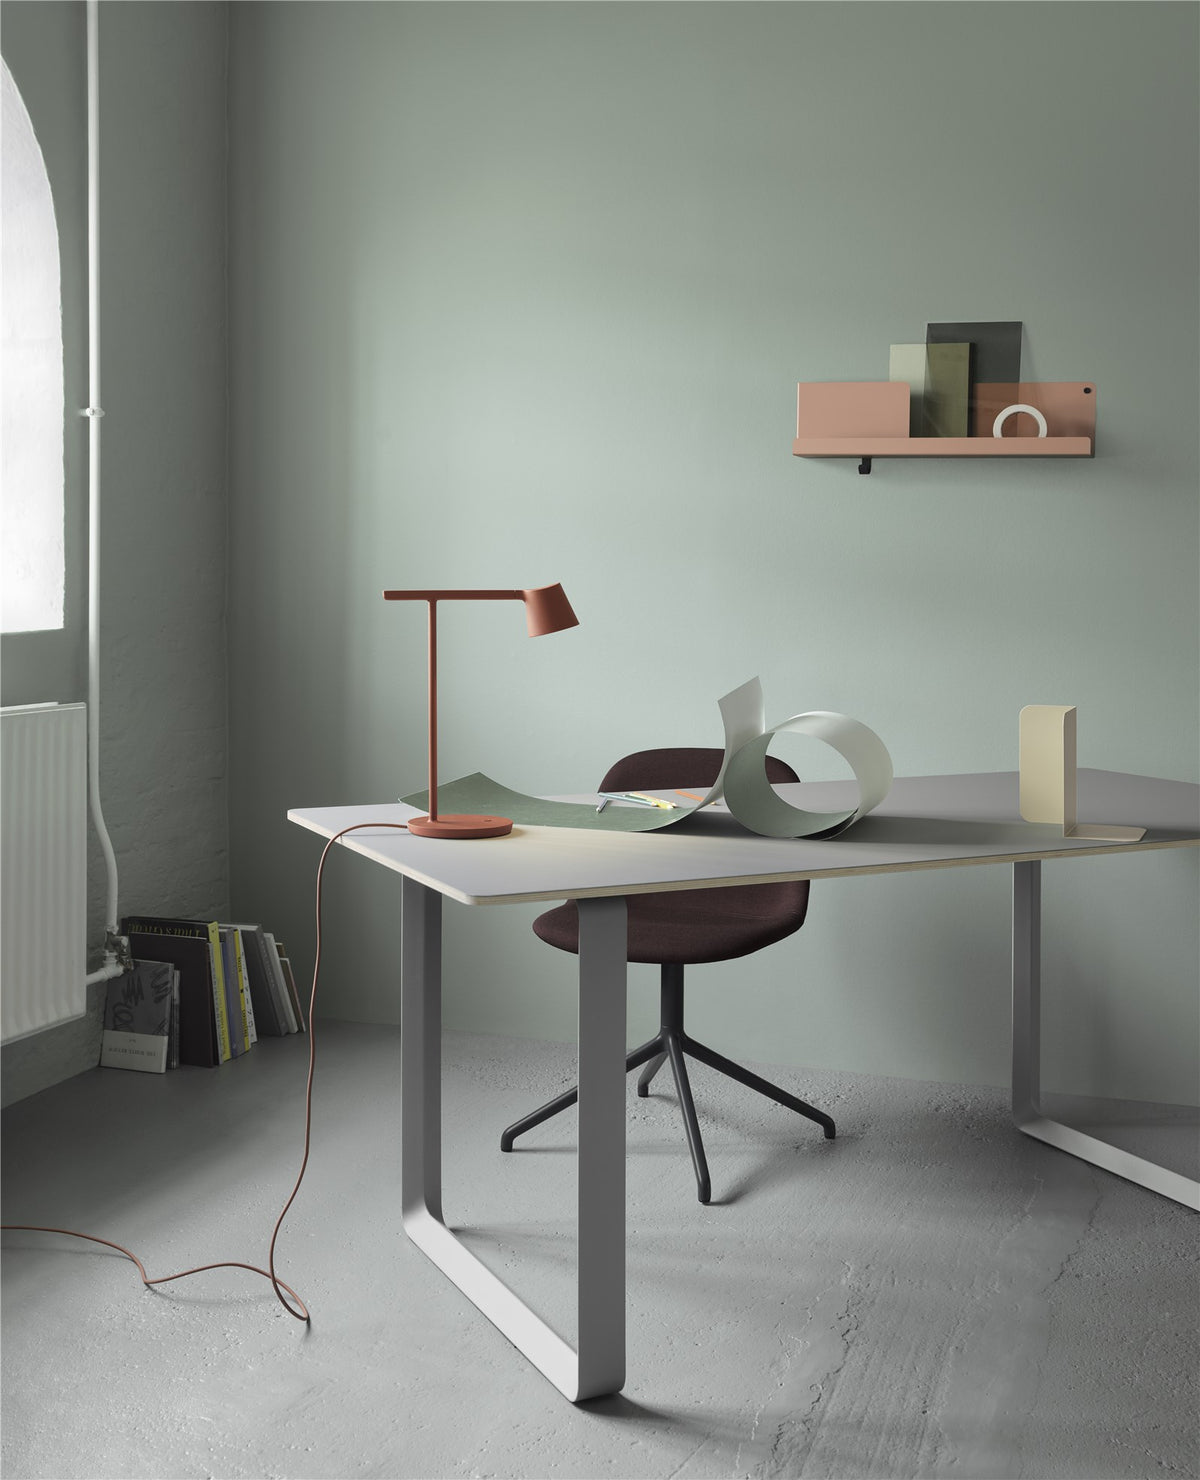 Tip Table Lamp by Muuto